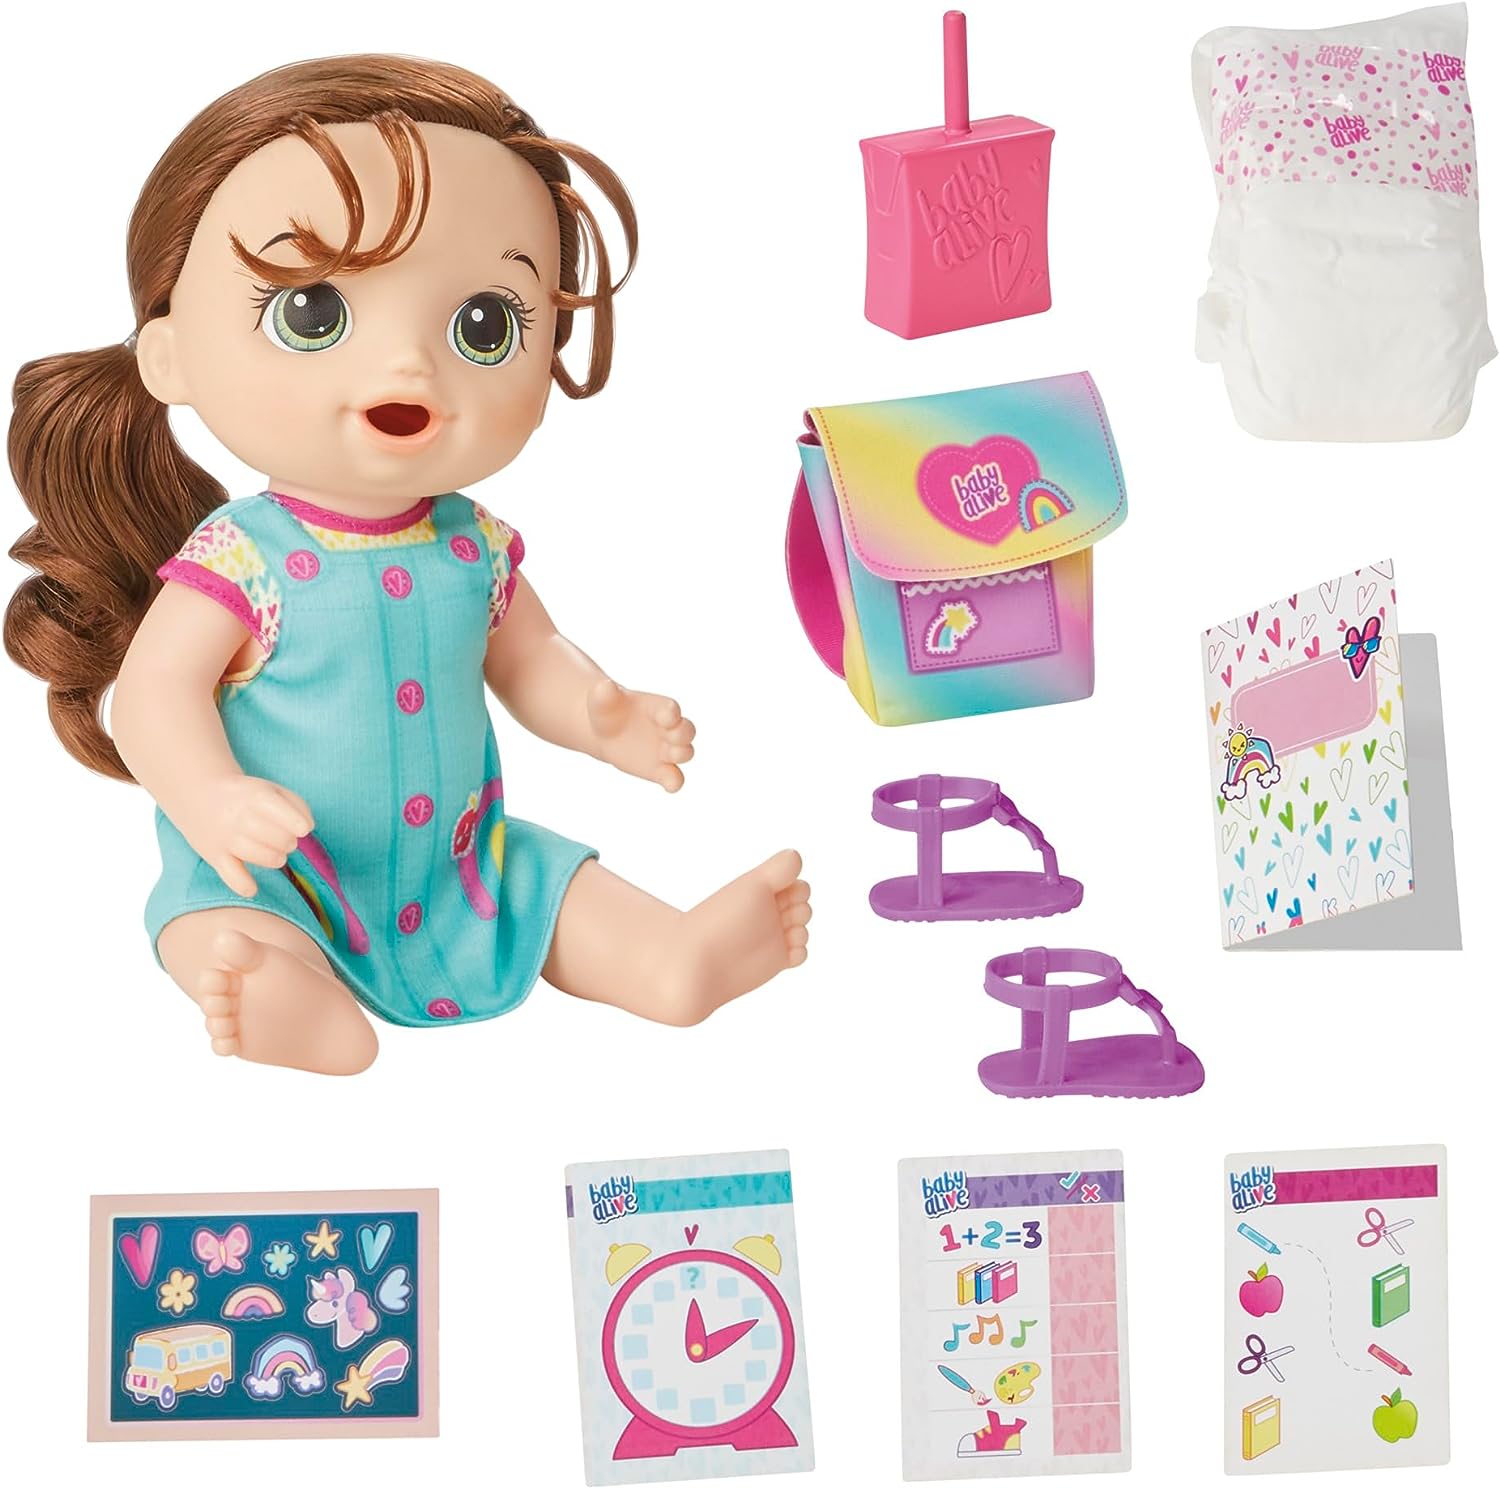 Baby Alive Time for School Baby Doll Set, Back to School Toys for 3 Year Old Girls & Boys & Up, 12 Inch Baby Doll, Brown Hair (Amazon Exclusive)